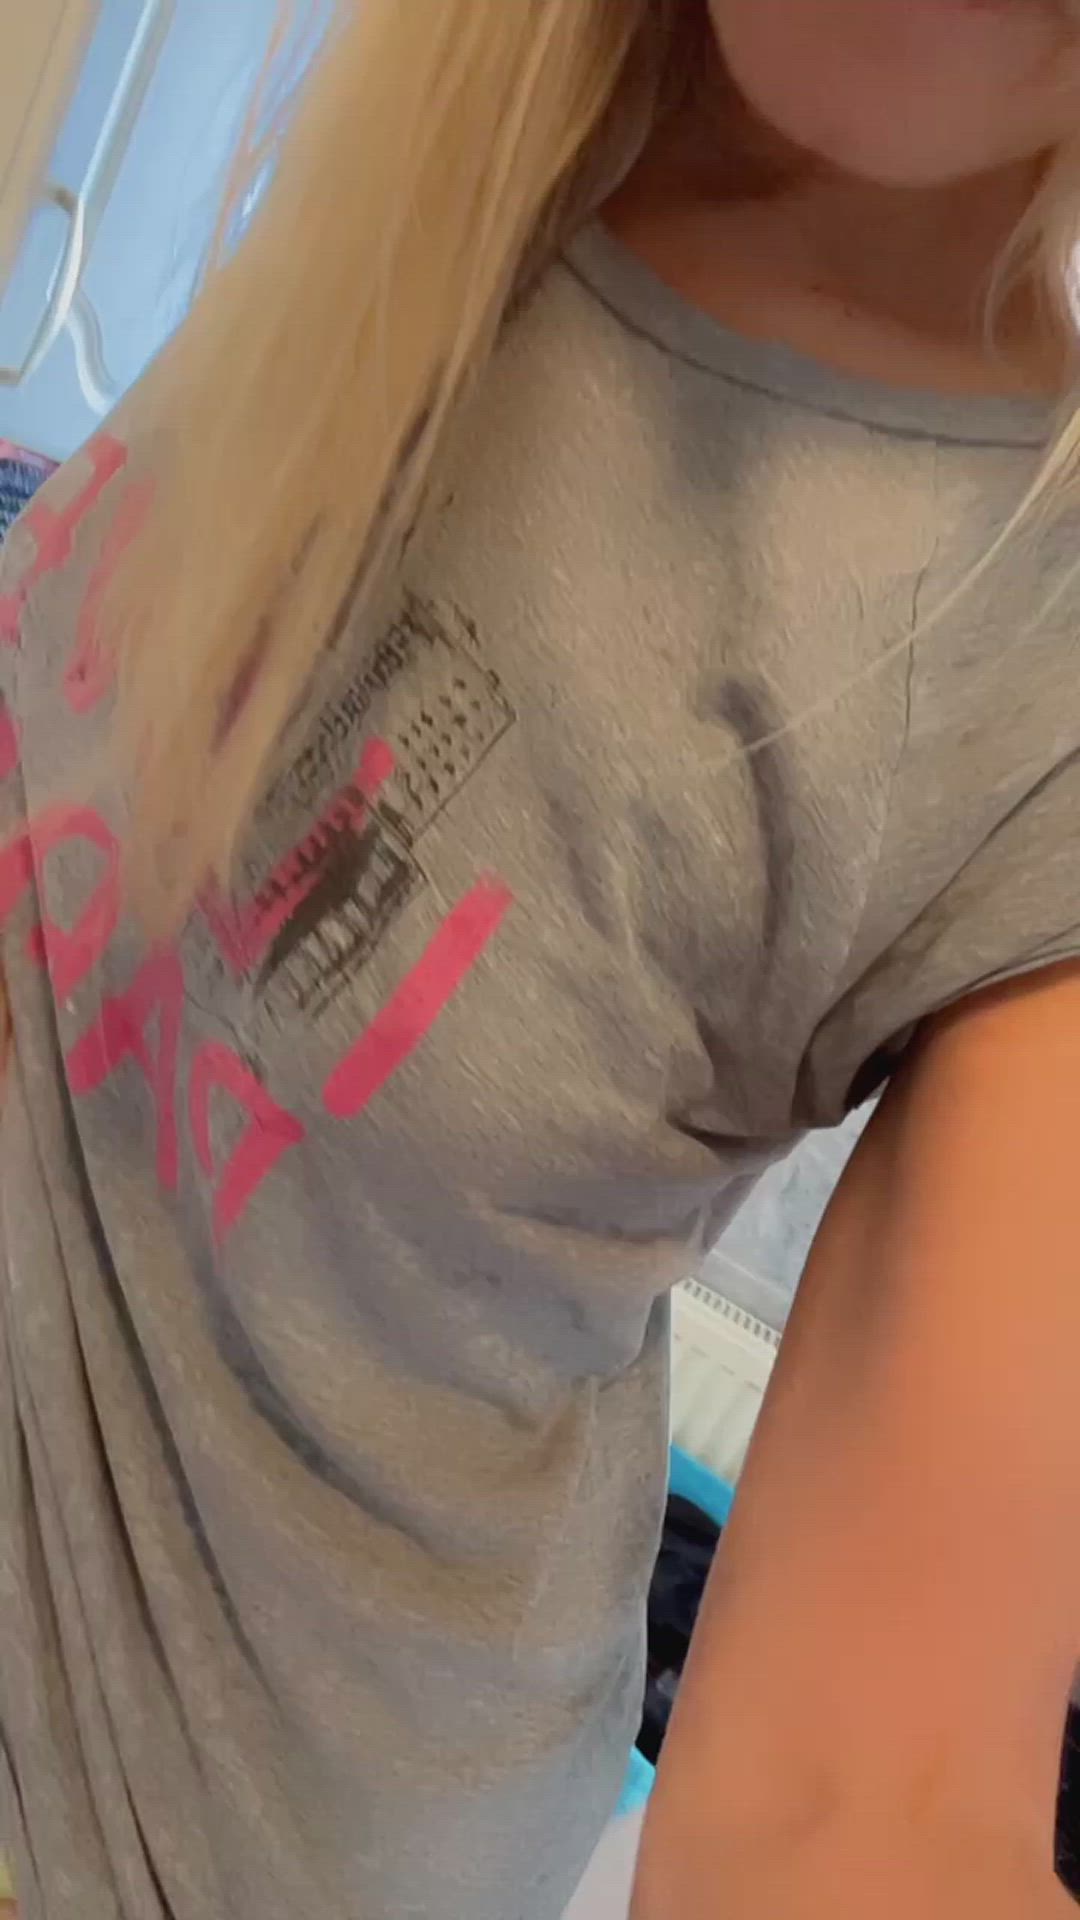 Panties porn video with onlyfans model swedishblossom <strong>@swedishblossom</strong>